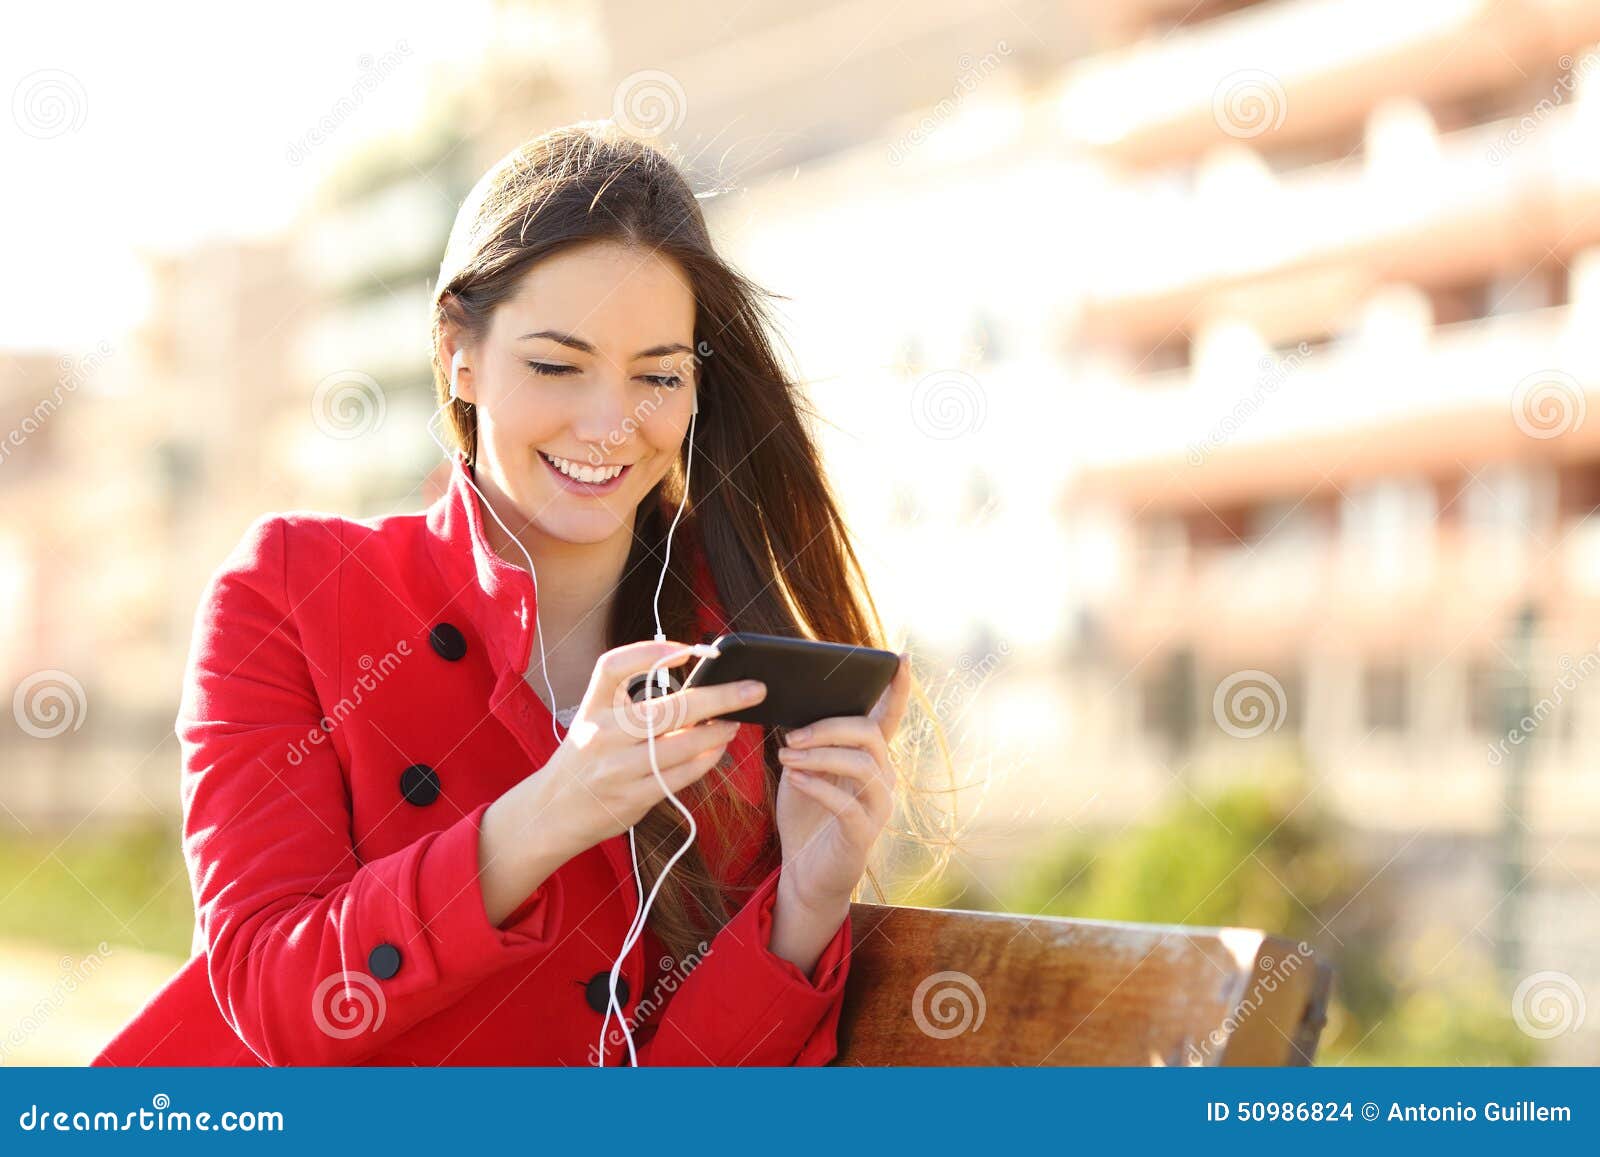 woman watching videos in a smart phone with earphones